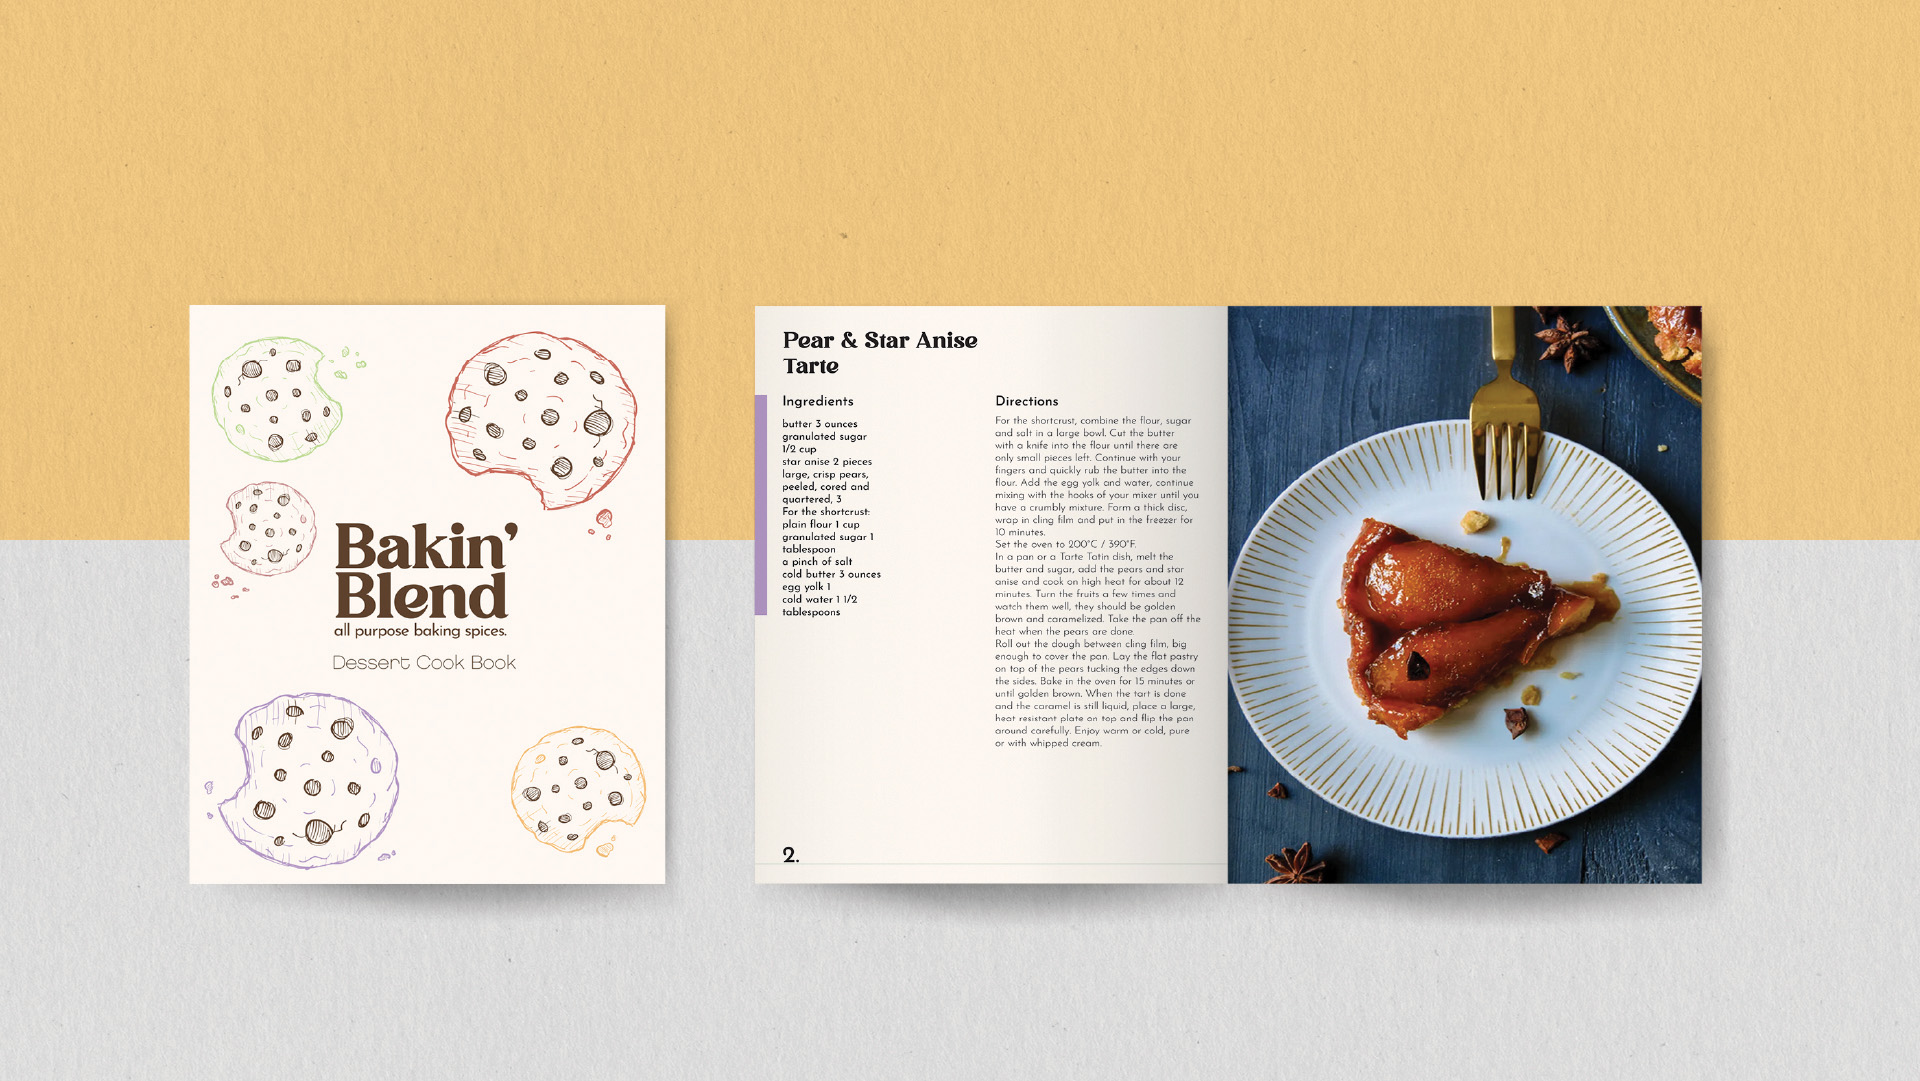 Bakin Blend Co. Cookbook / "Bakin Blend Co. Cookbook,"brand development and cookbook zine, 8.5 x 11 inches, 2023. The brand Bakin Blend Co. brand development was a group project with Olivia Bonniwell and E.J. Weathers. The Cookbook Zine created would be included with the purchase